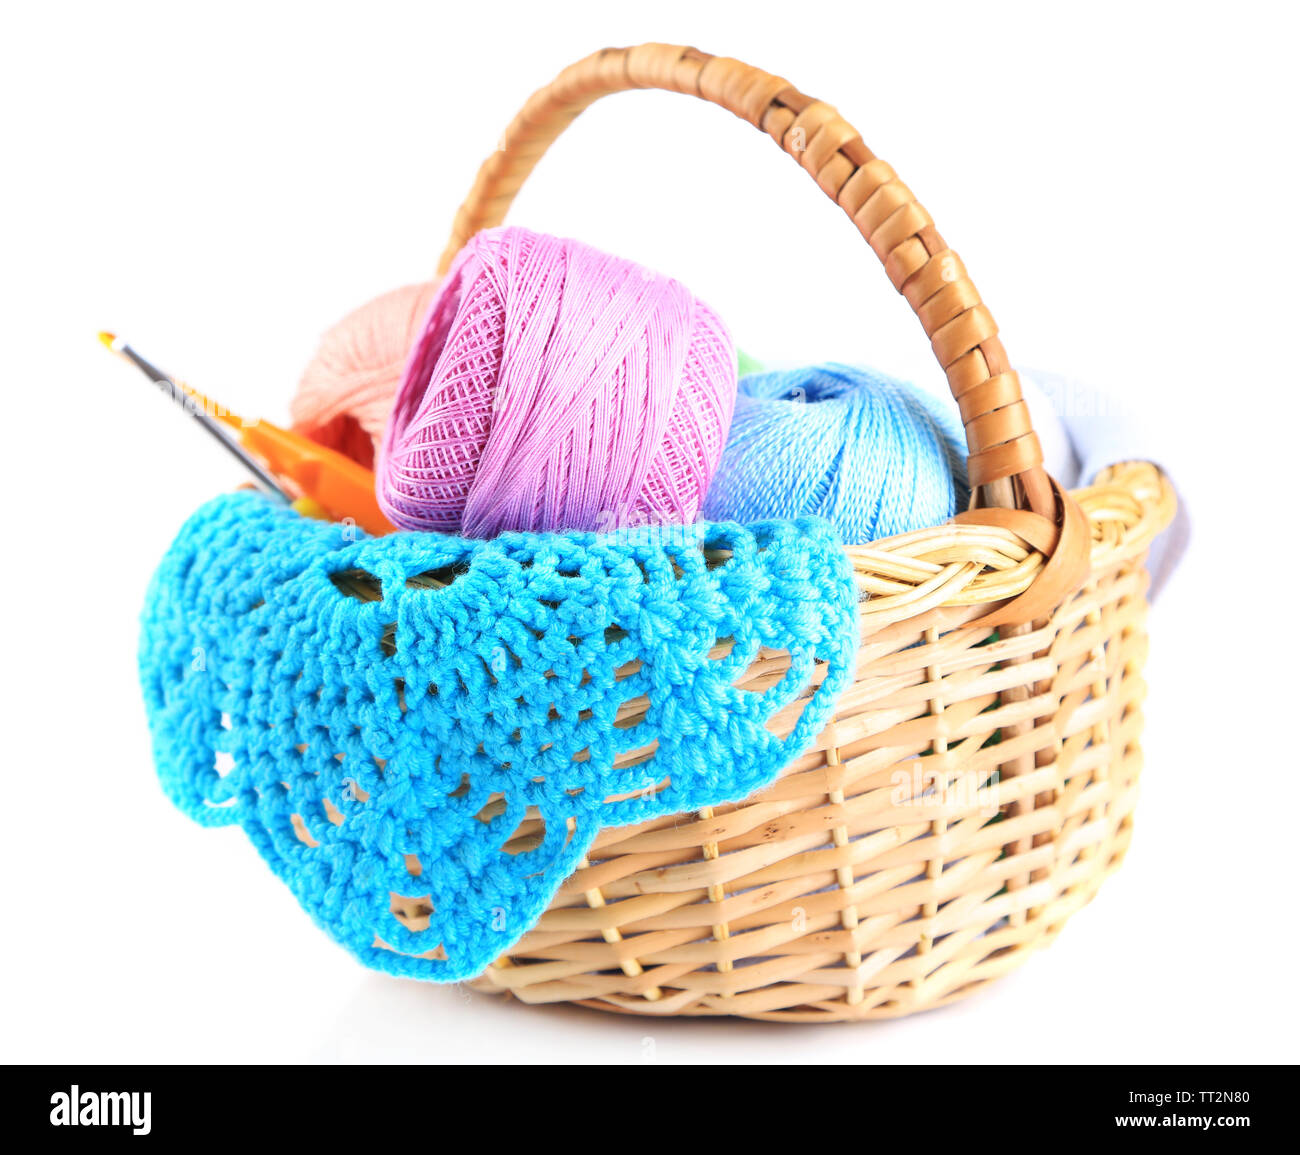 Yarns in Basket with Crochet Hooks in Harmonious Colors. Knitting, Crocheting  Supplies. Stock Photo - Image of design, hand: 116778210